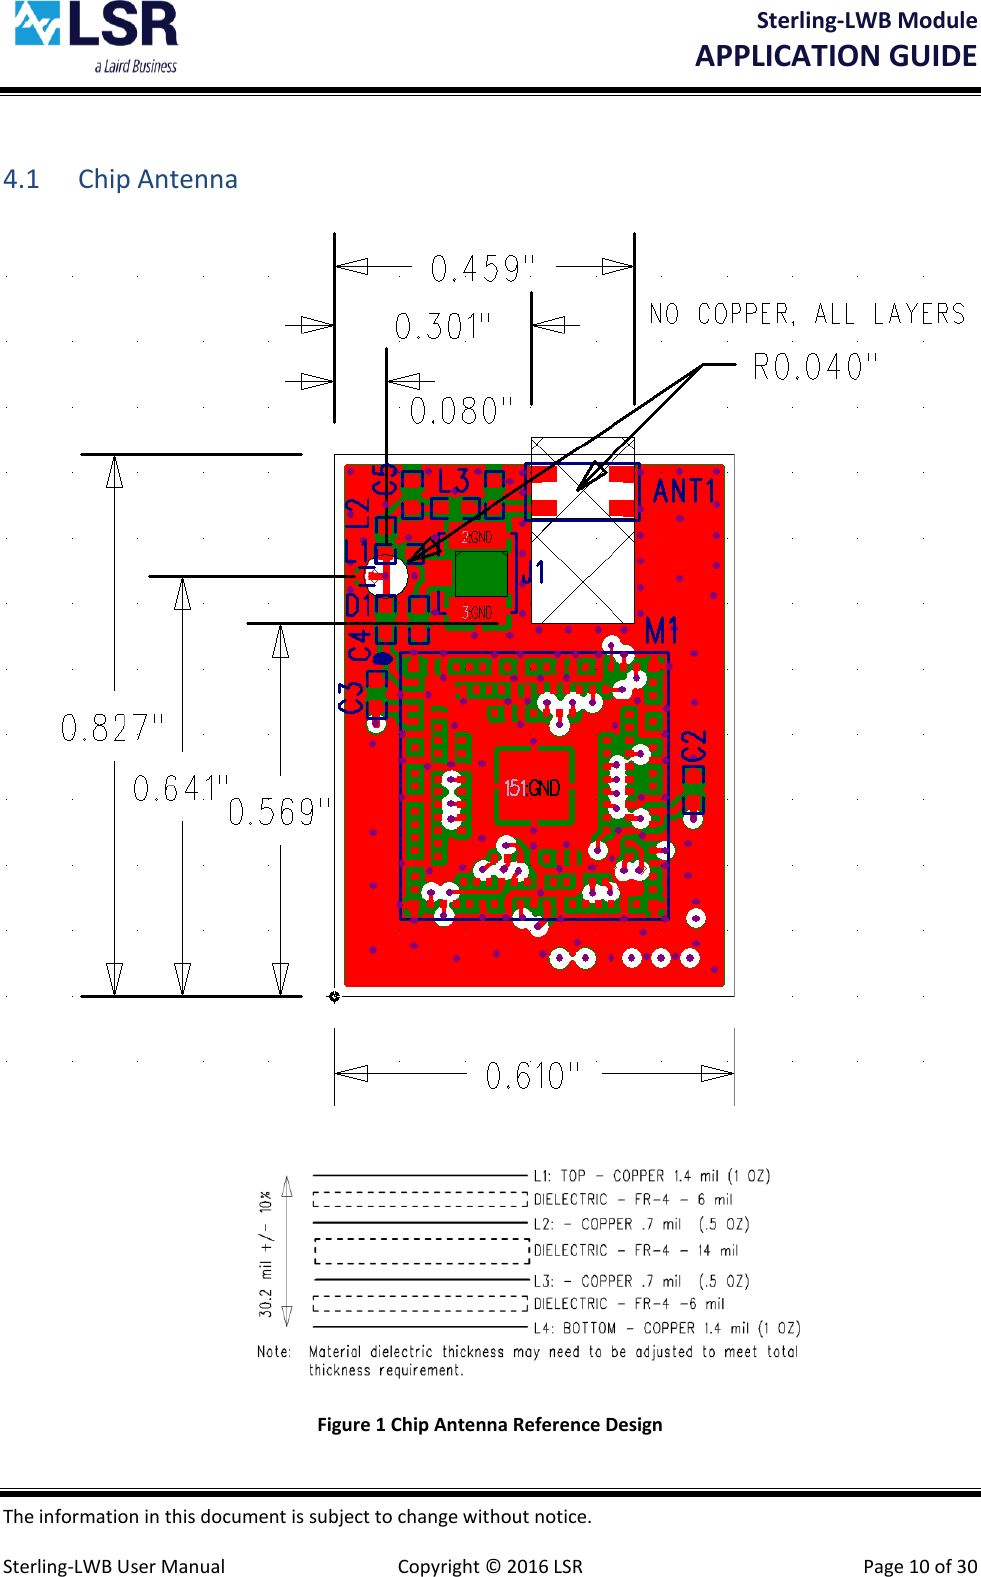 Sterling-LWB Module       APPLICATION GUIDE  The information in this document is subject to change without notice.  Sterling-LWB User Manual  Copyright © 2016 LSR  Page 10 of 30  4.1 Chip Antenna   Figure 1 Chip Antenna Reference Design